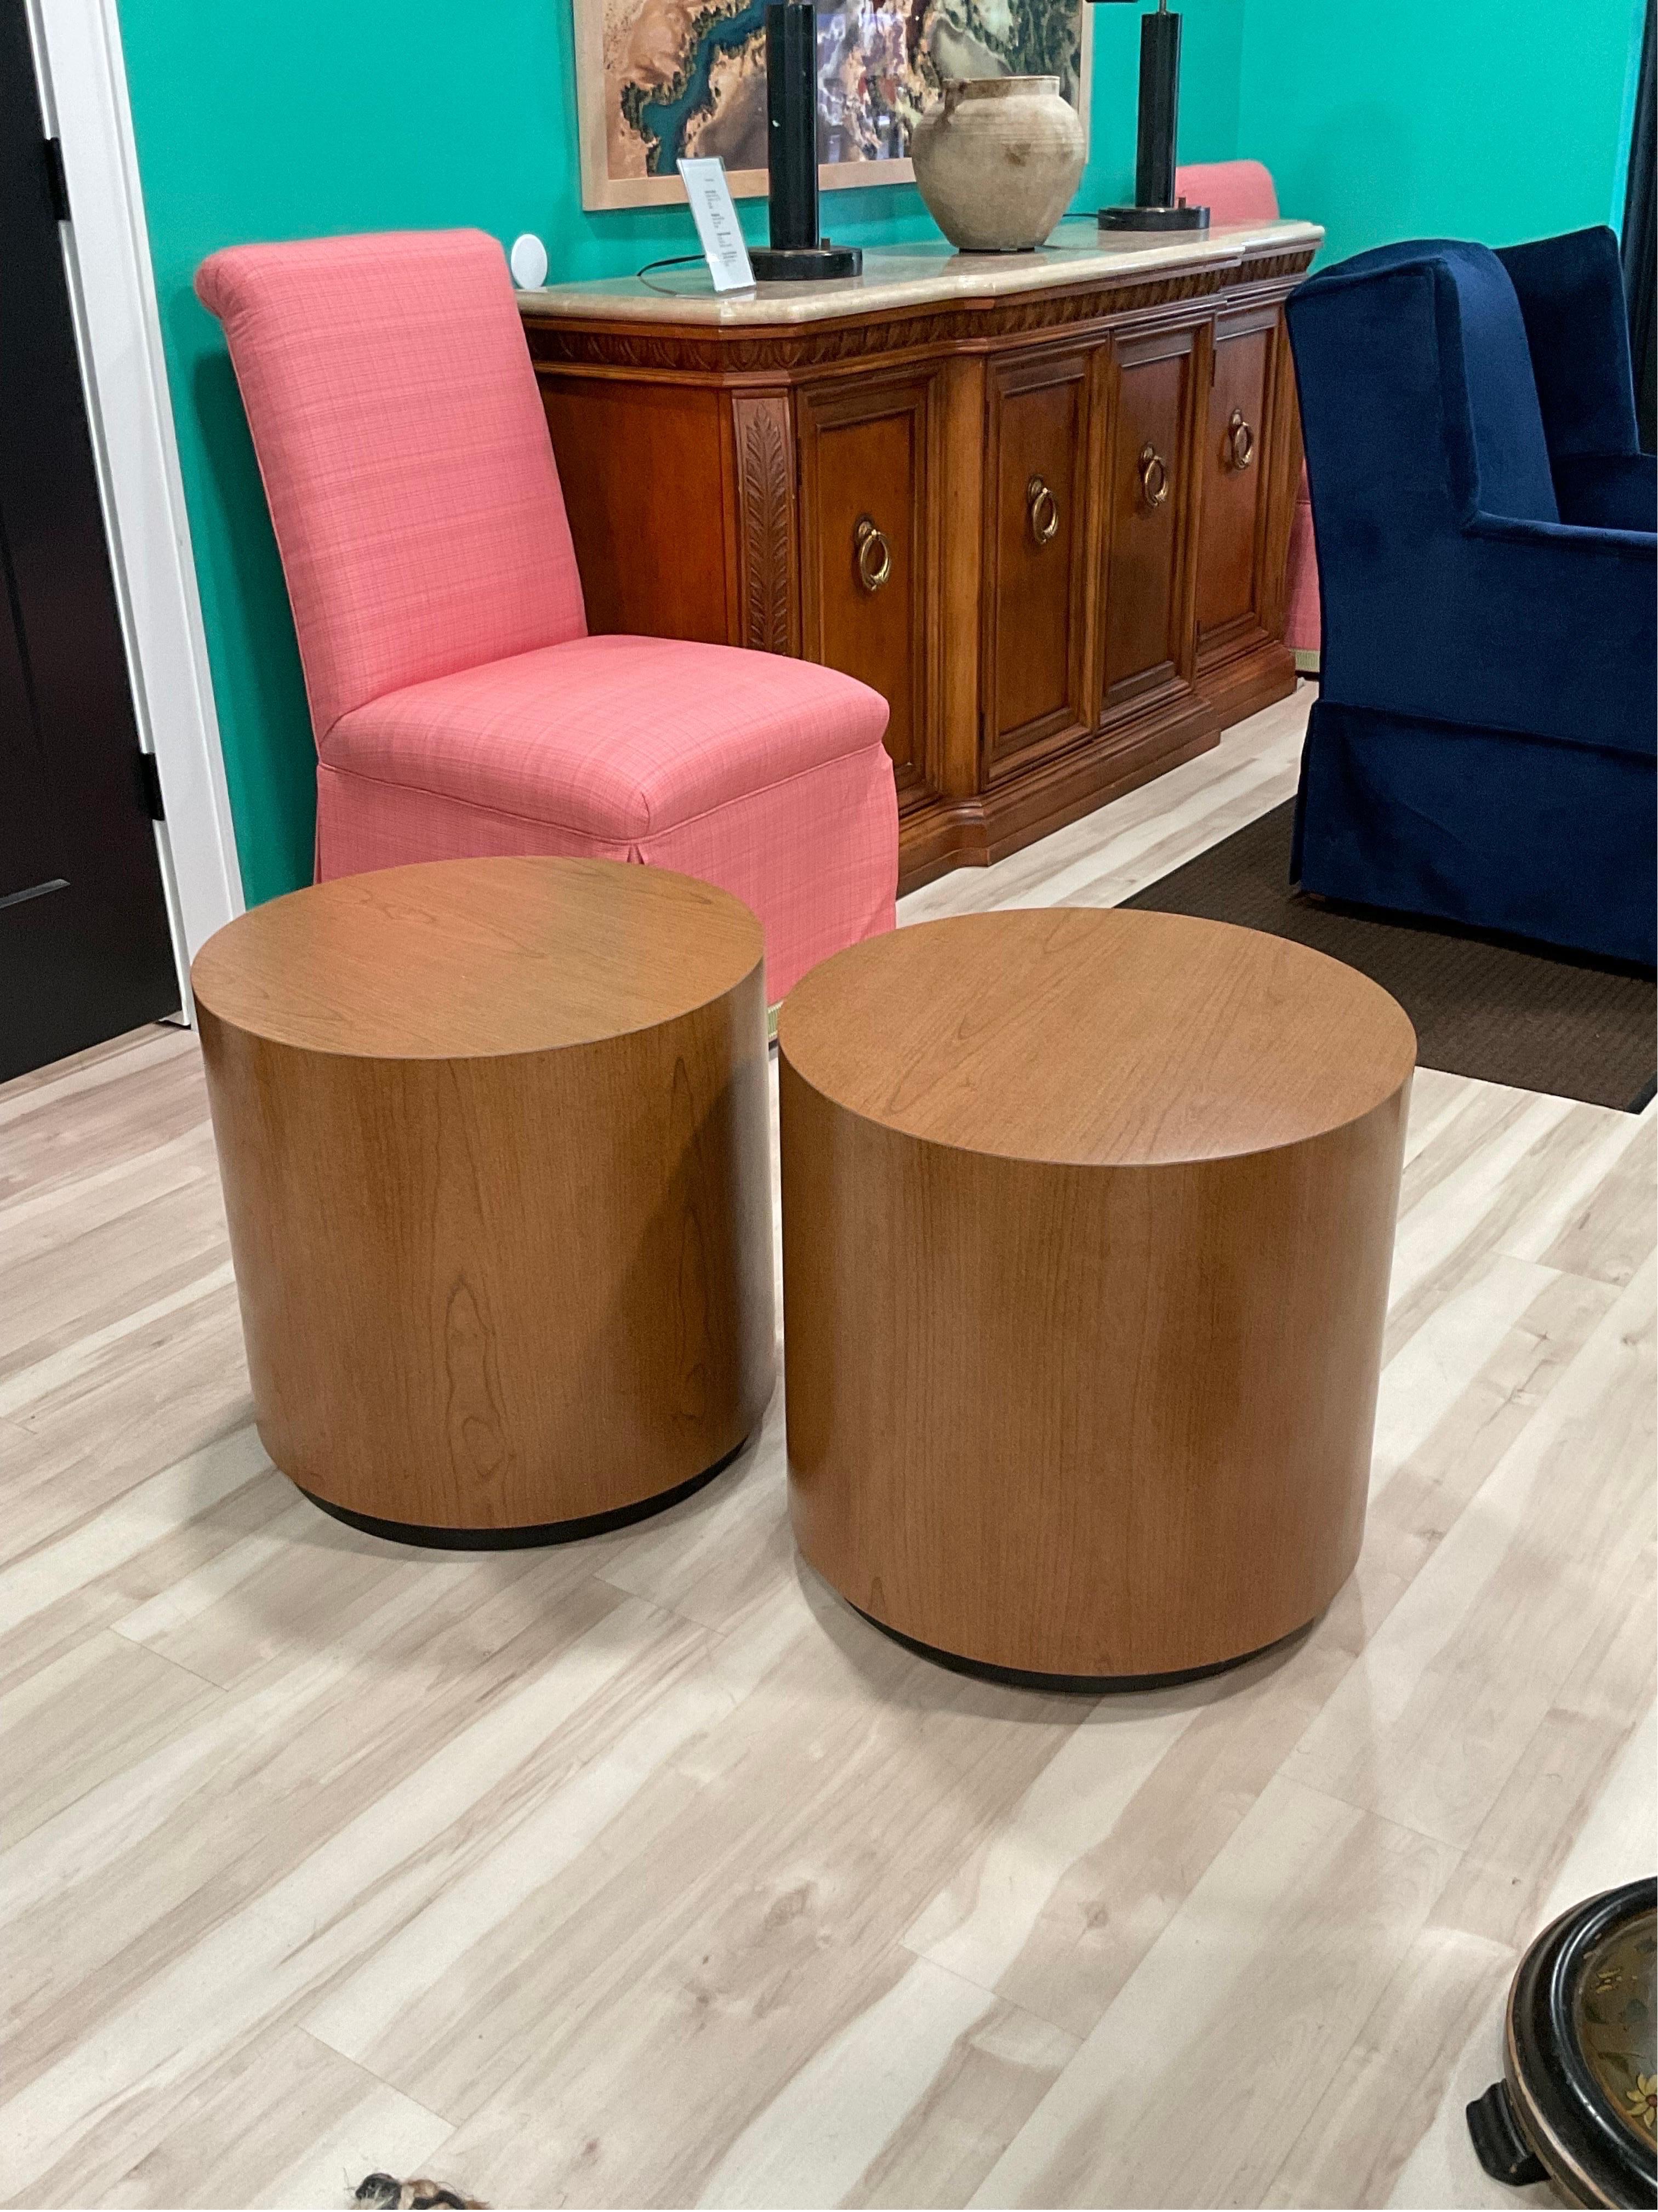 Pristine pair of wood grain laminate round side tables. Great look. Very very cool. Perfect size. Color is beautiful.


